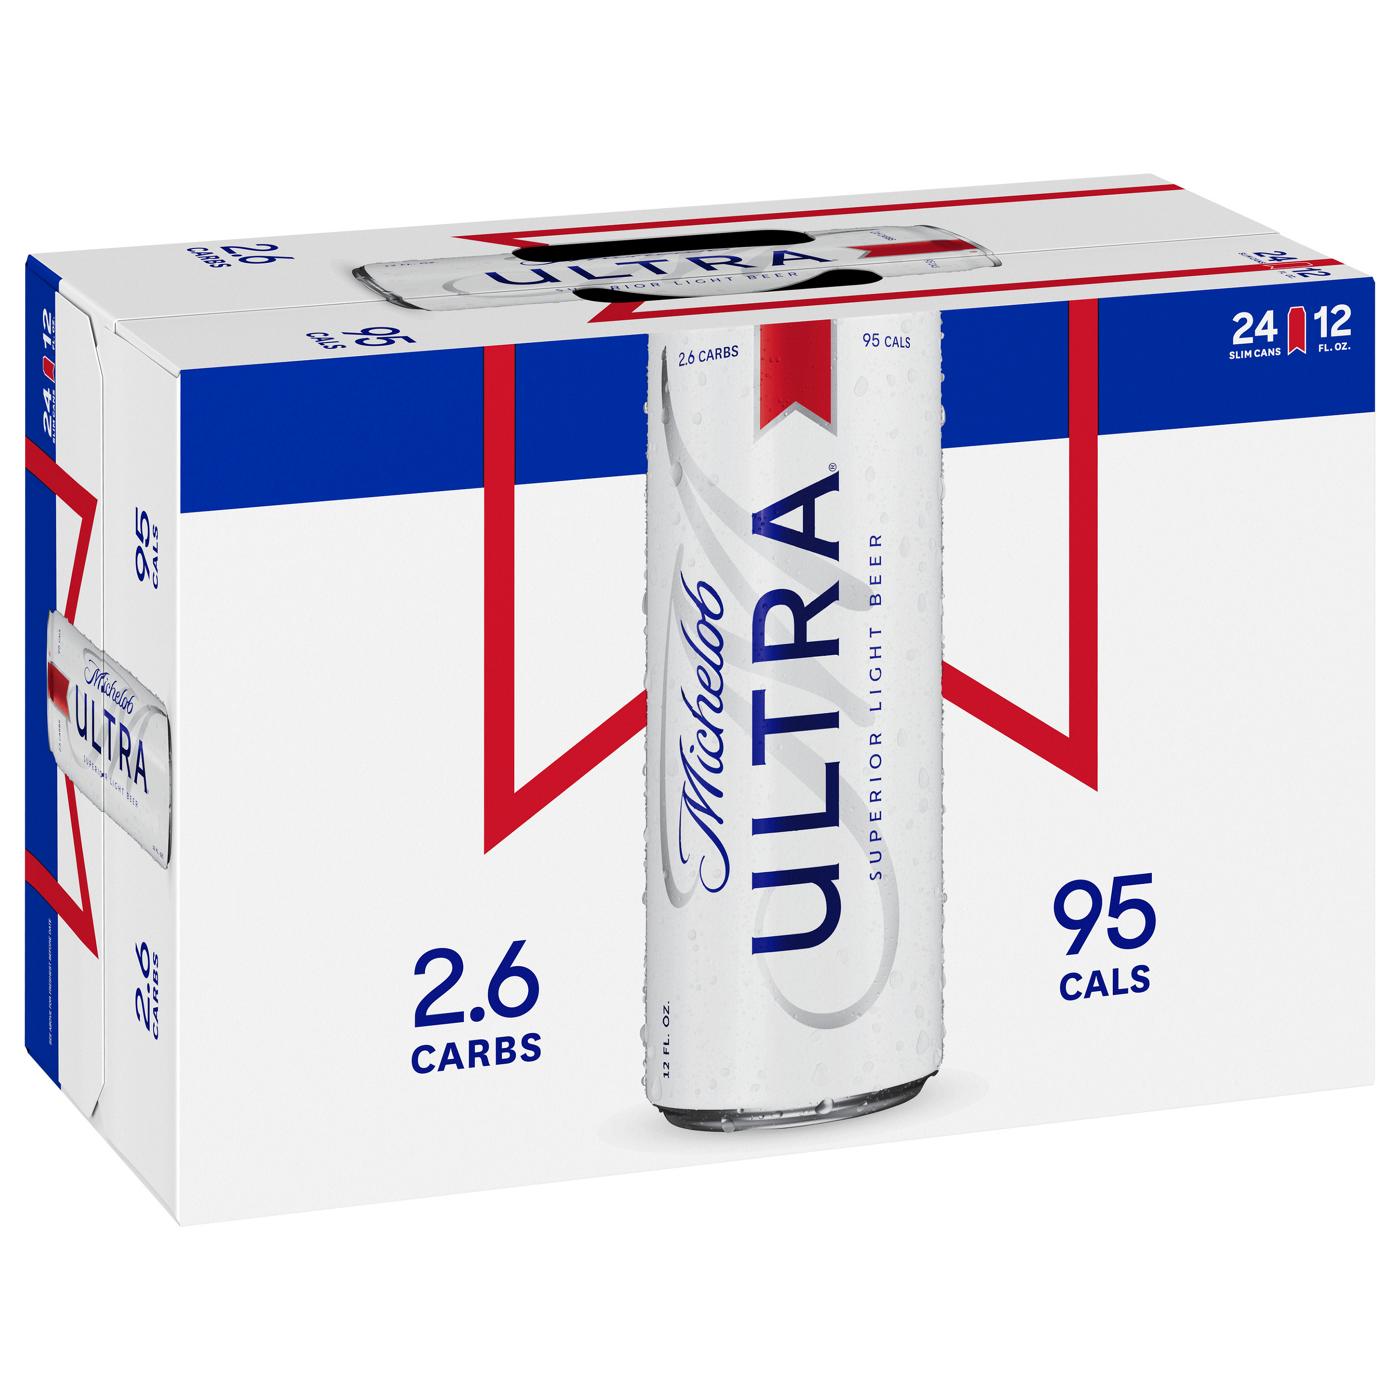 Michelob Ultra Beer 24 pk Cans; image 1 of 2